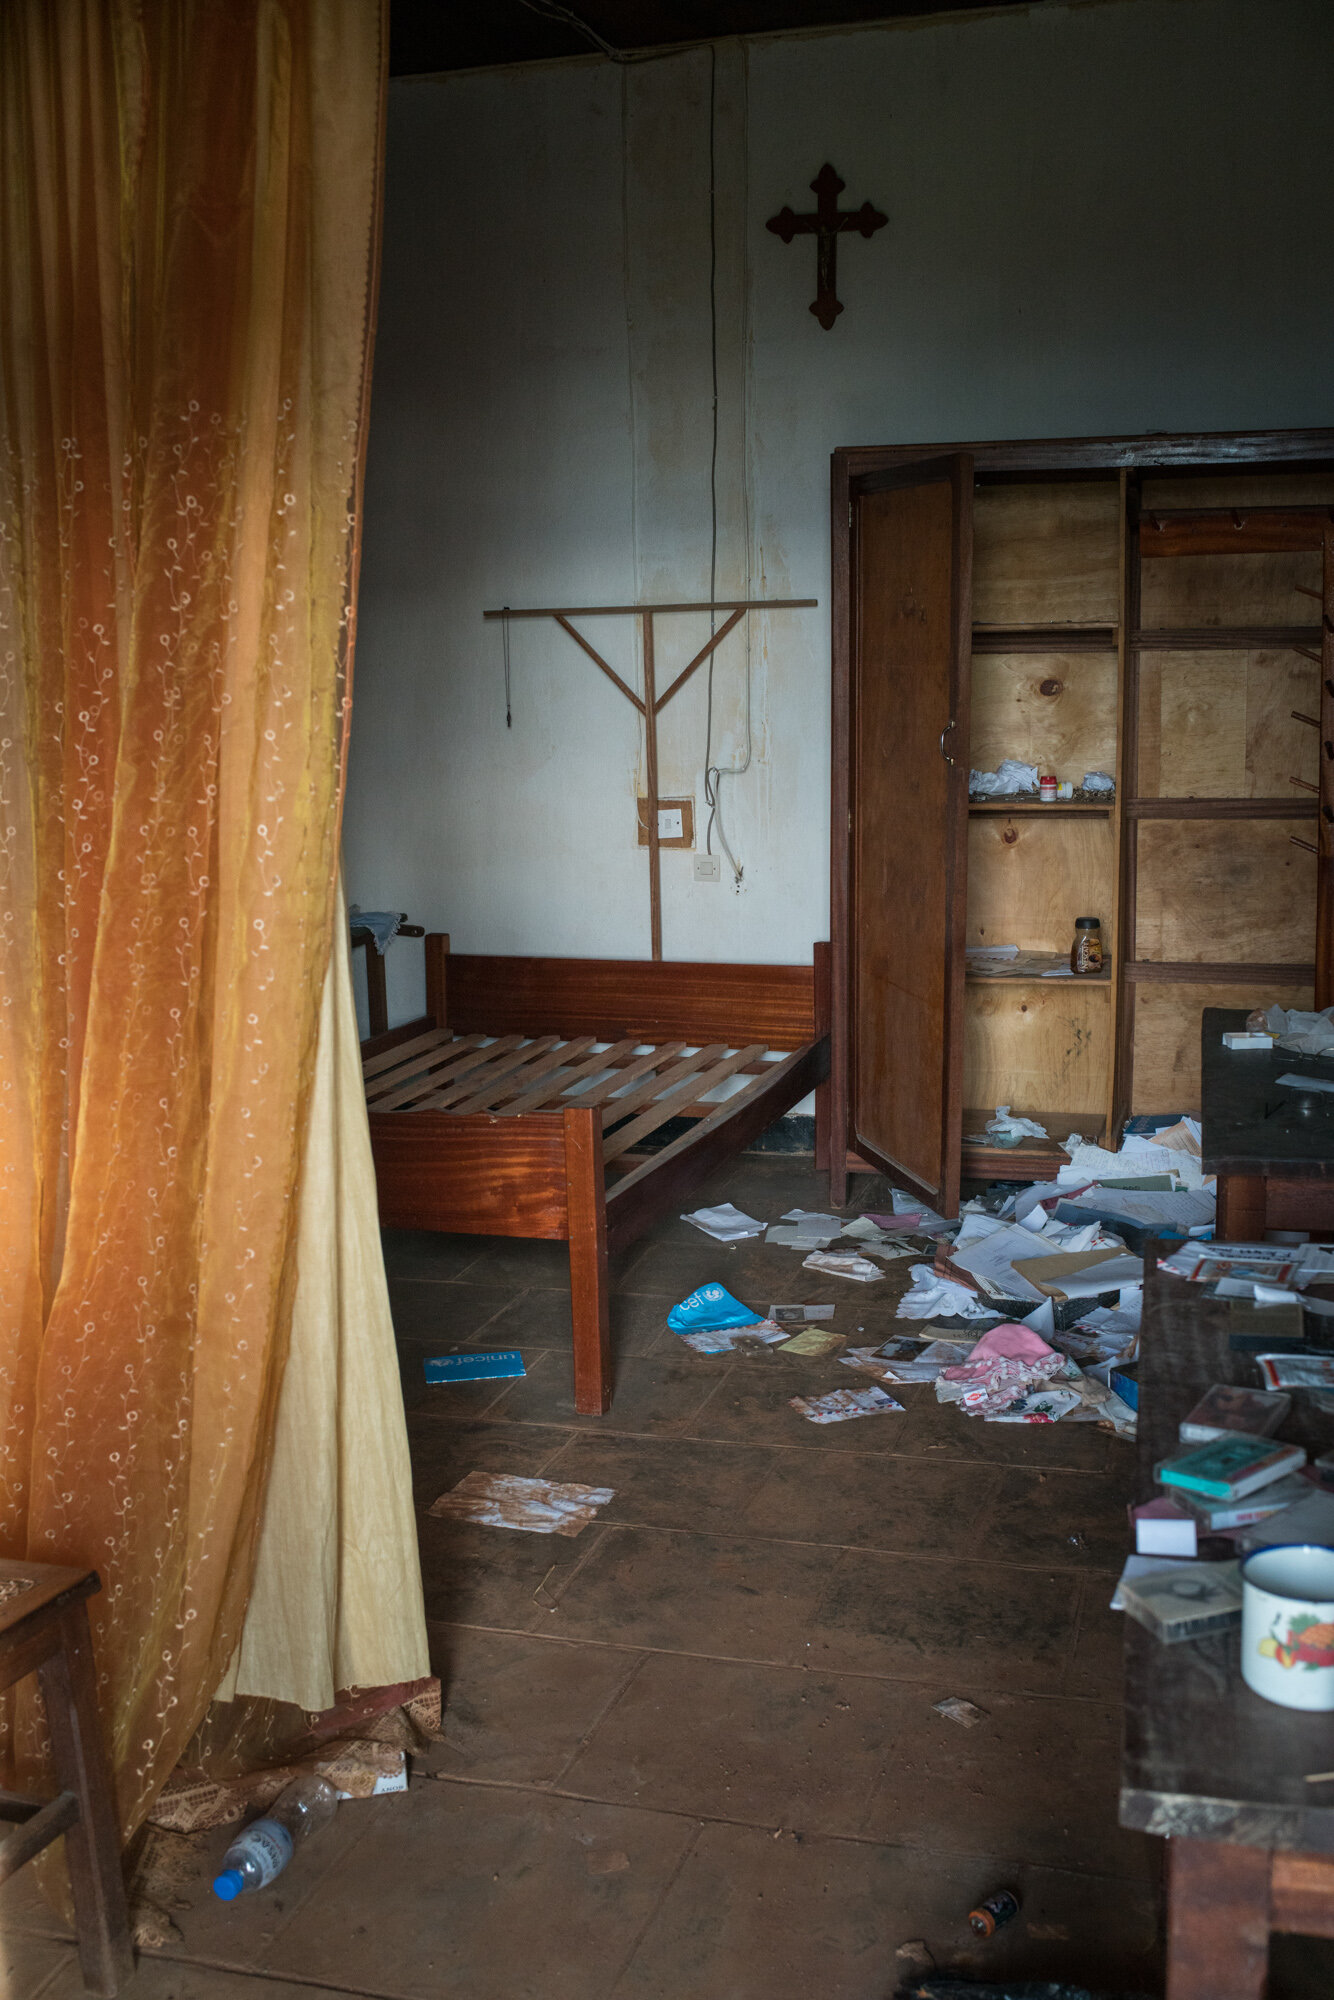  The ransacked priest's chamber in the cathedral in Lita, a town deserted and in ruins after it was attacked on March 4, 2018. Next door, behind the school, the Uruguyan batallion of the UN peacekeeping mission to the DRC (MONUSCO) have built a small